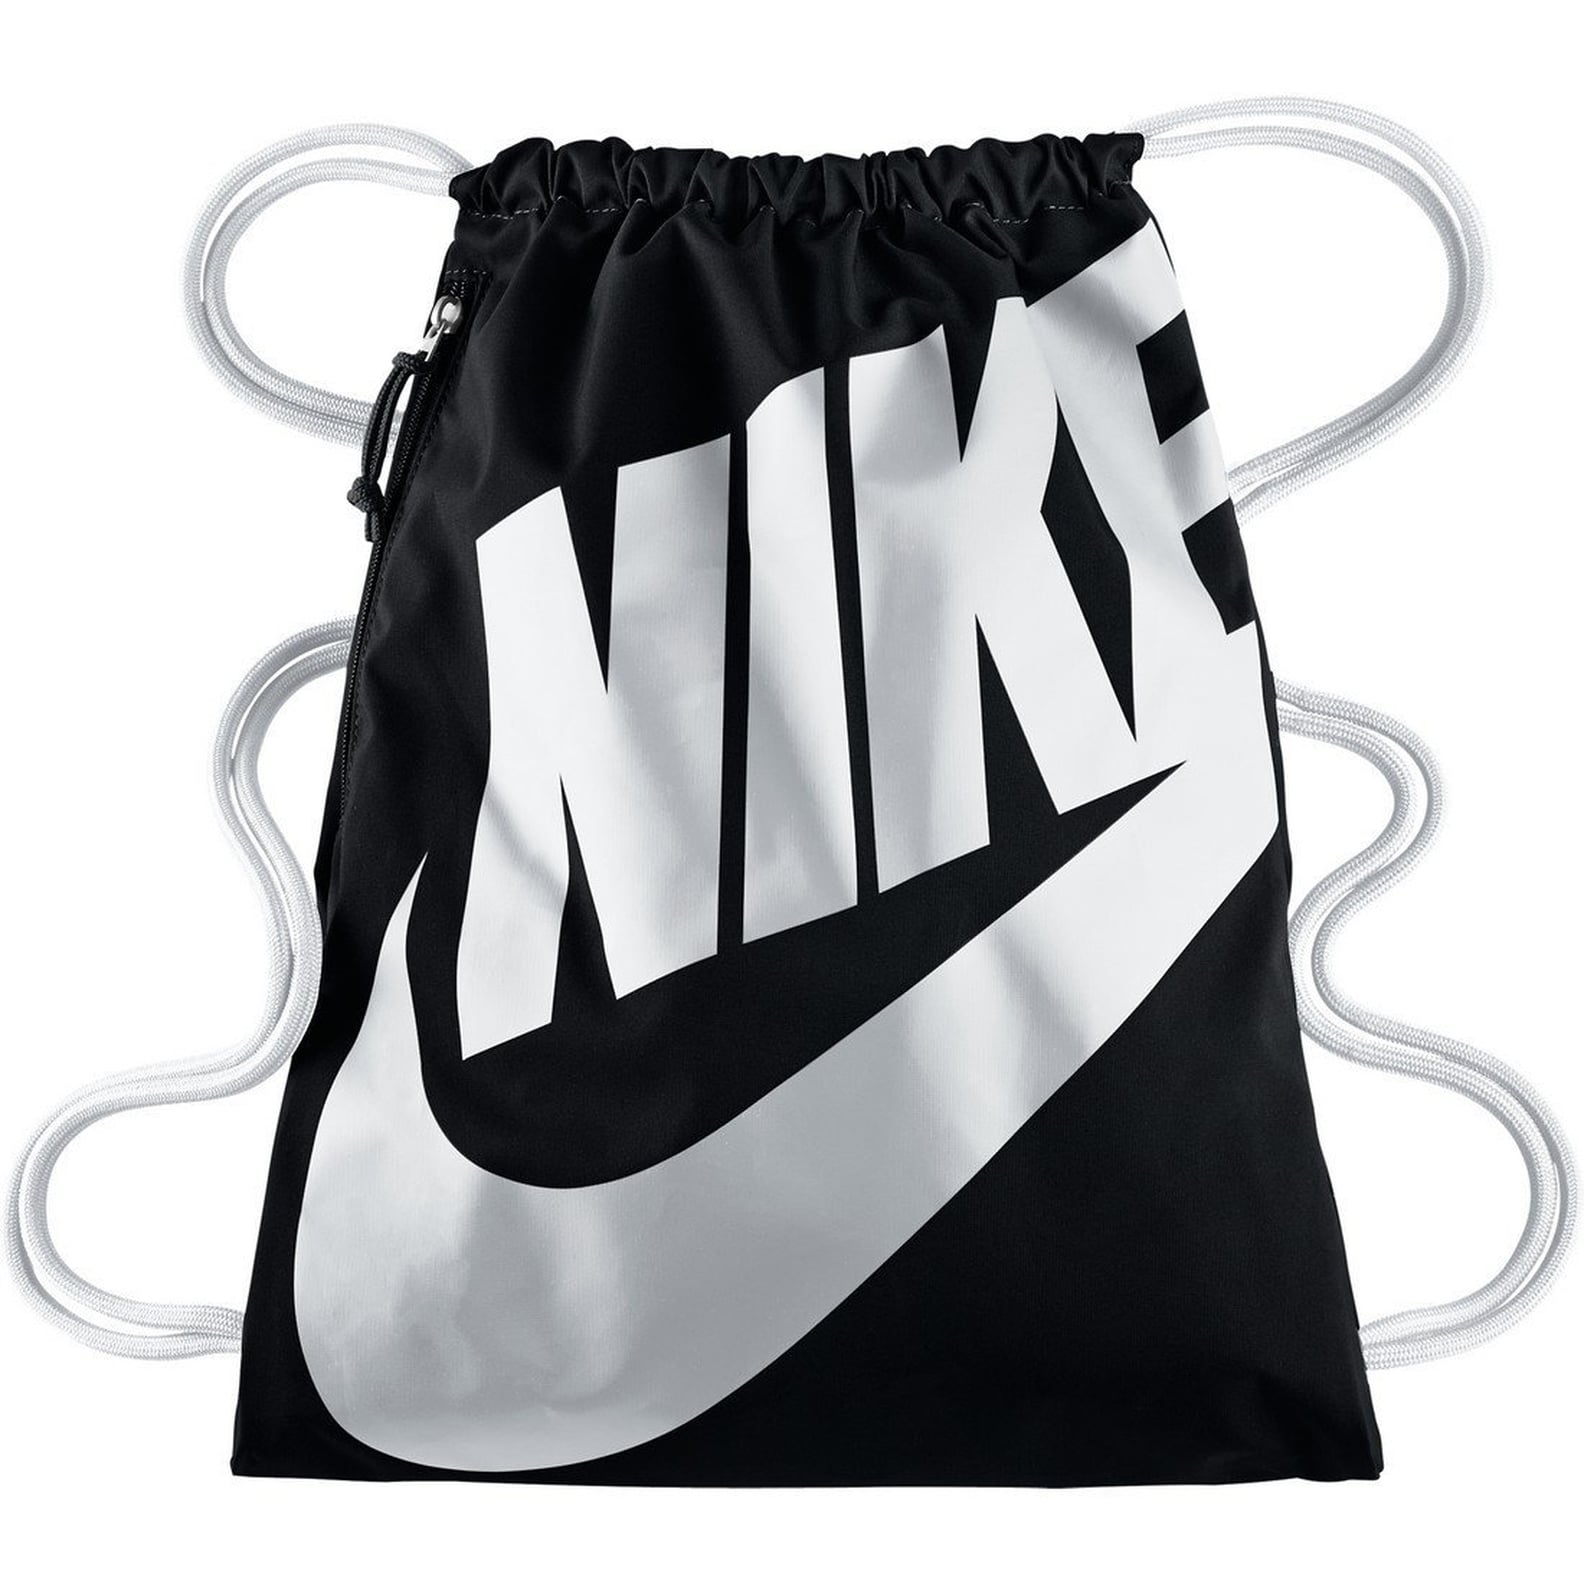 Best Nike Gifts From Amazon | POPSUGAR Fitness